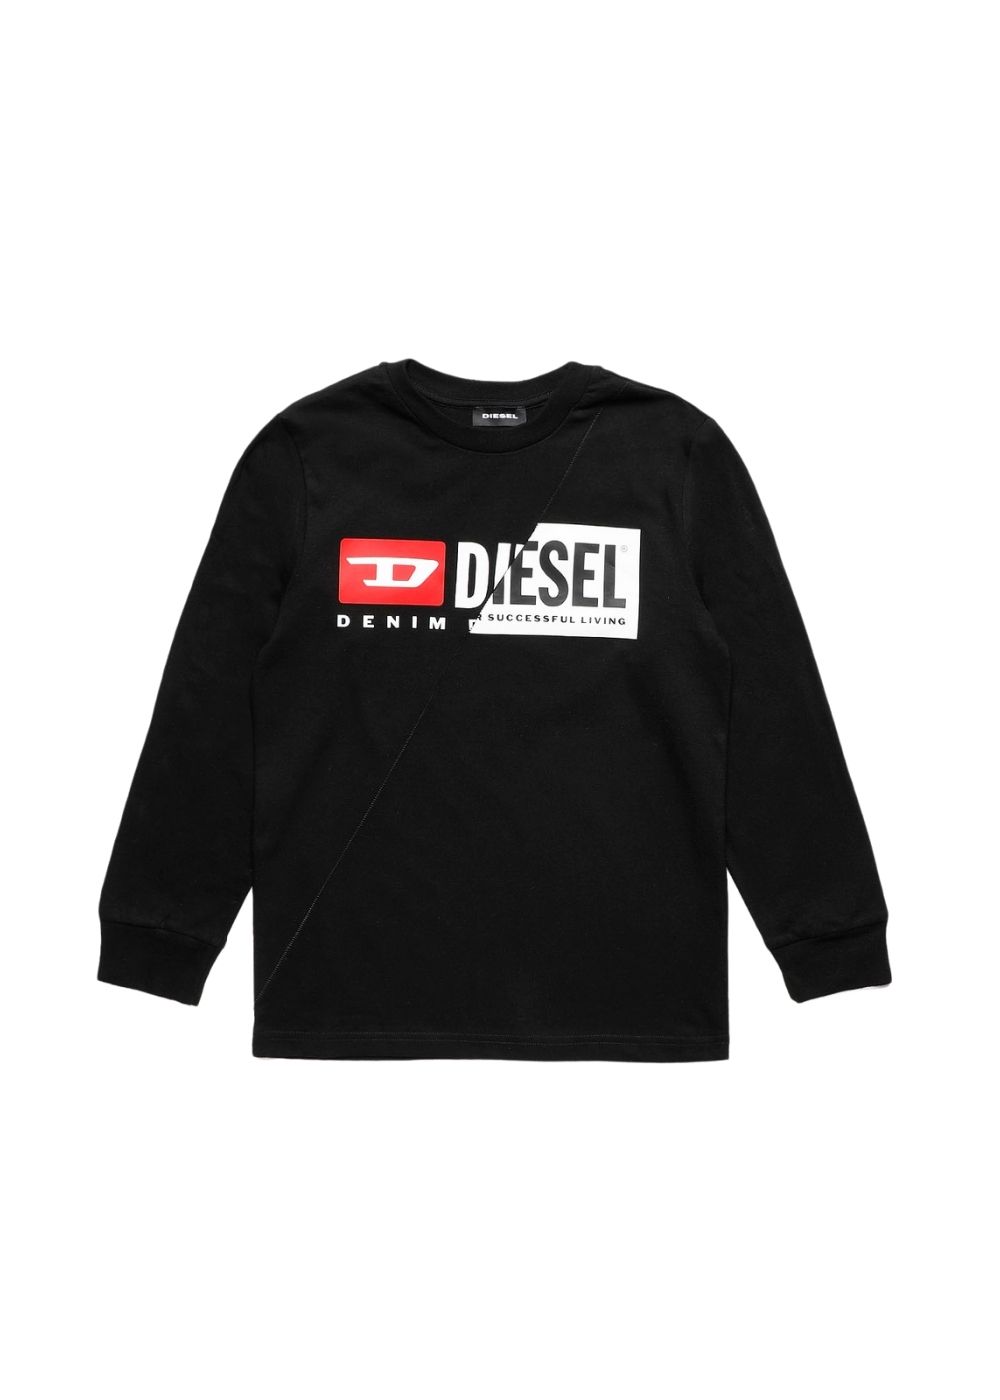 Featured image for “DIESEL T-SHIRT LOGO”